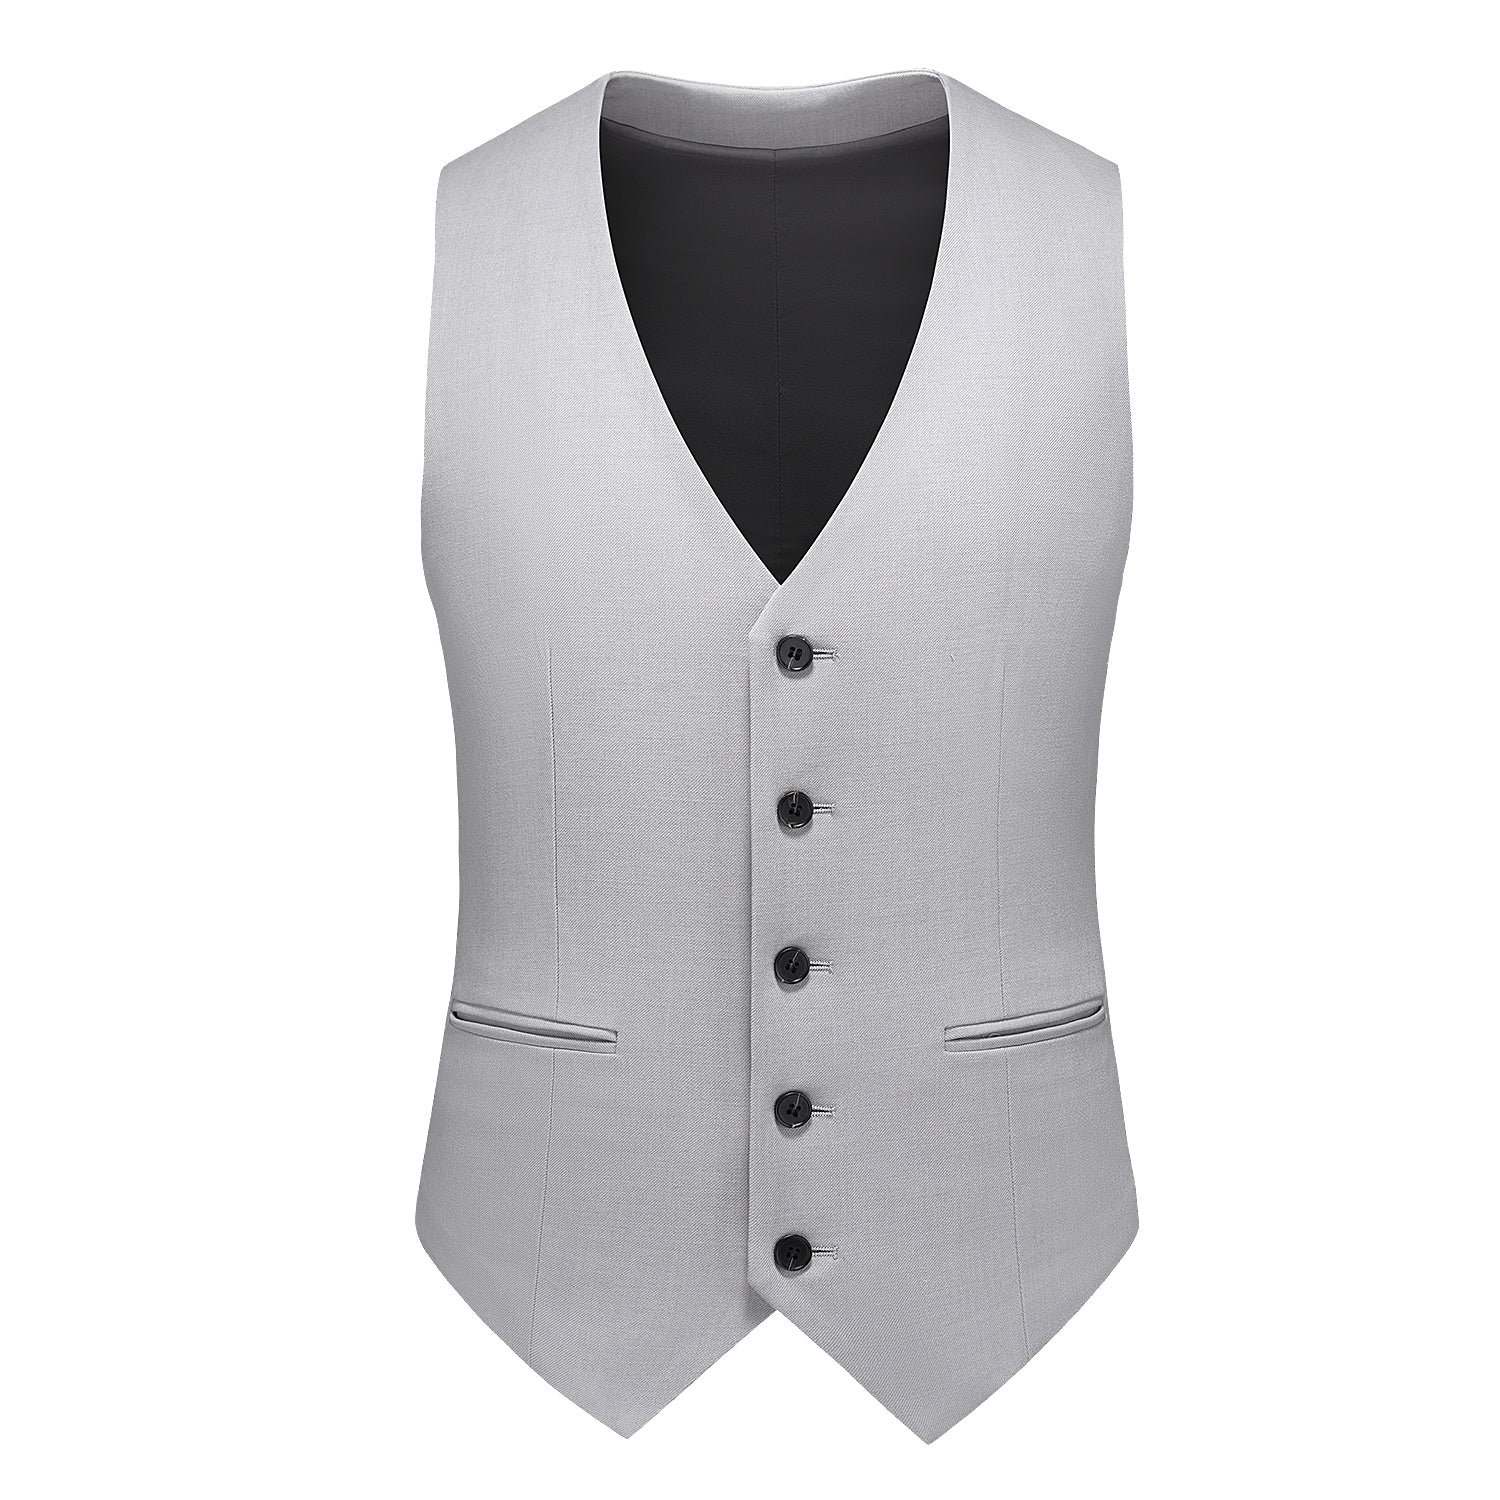 Men's Grey 3 Piece Double Breasted Suit